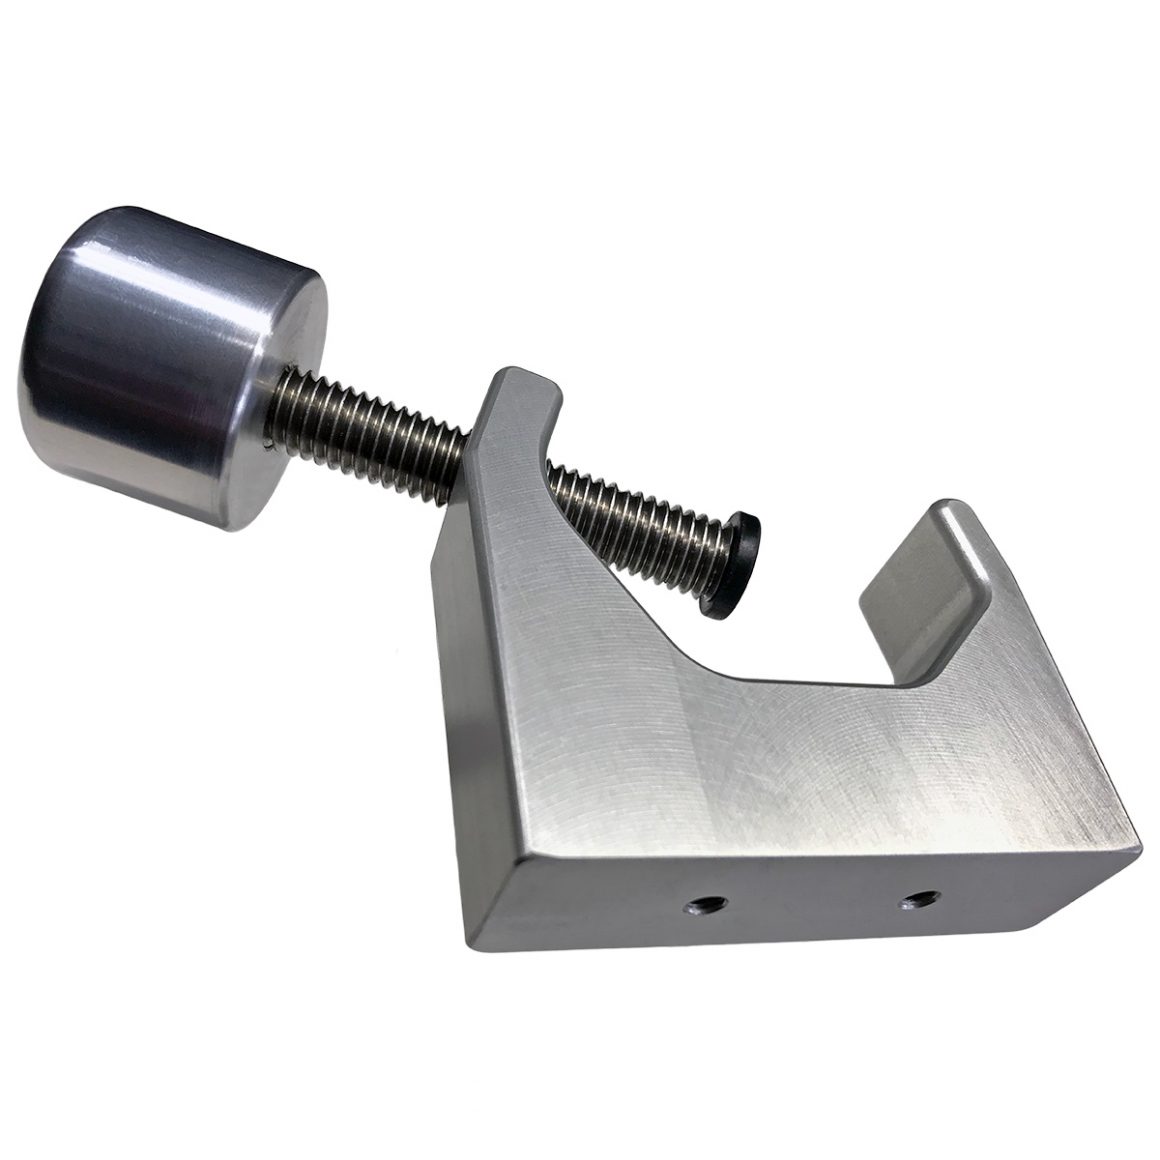 Universal Quick Change Clamp - Secure Mount